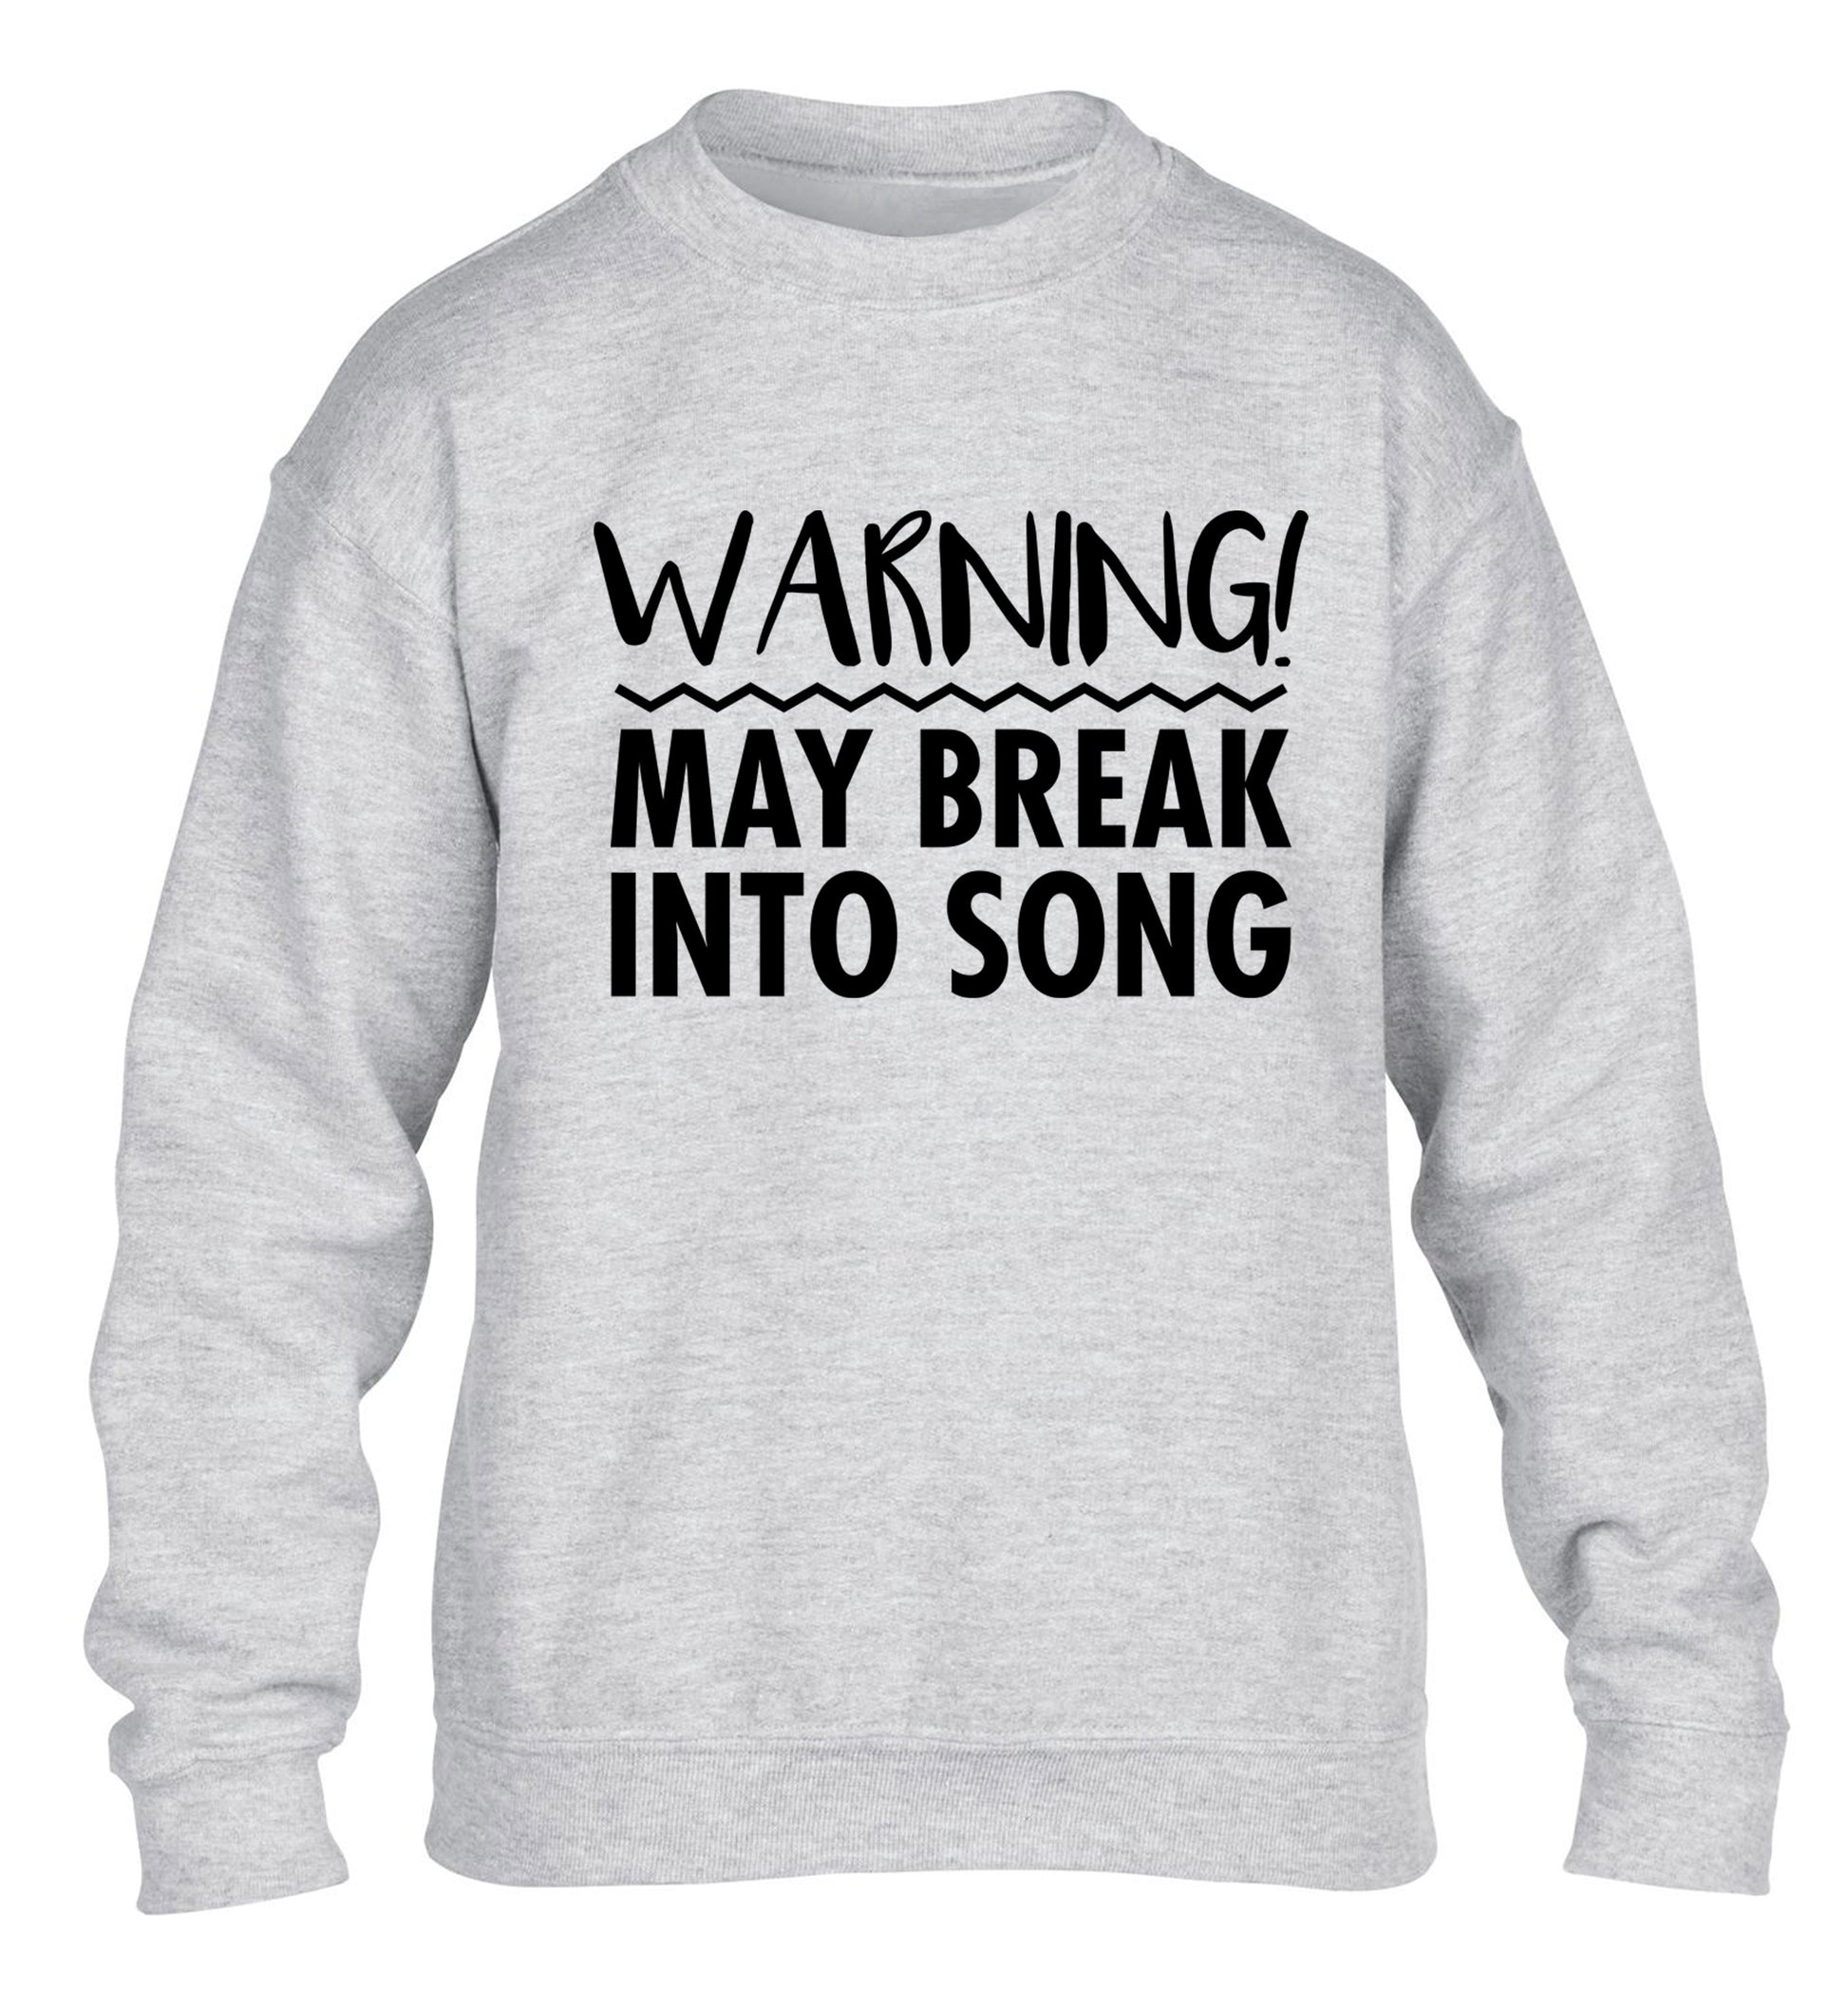 Warning may break into song children's grey sweater 12-14 Years